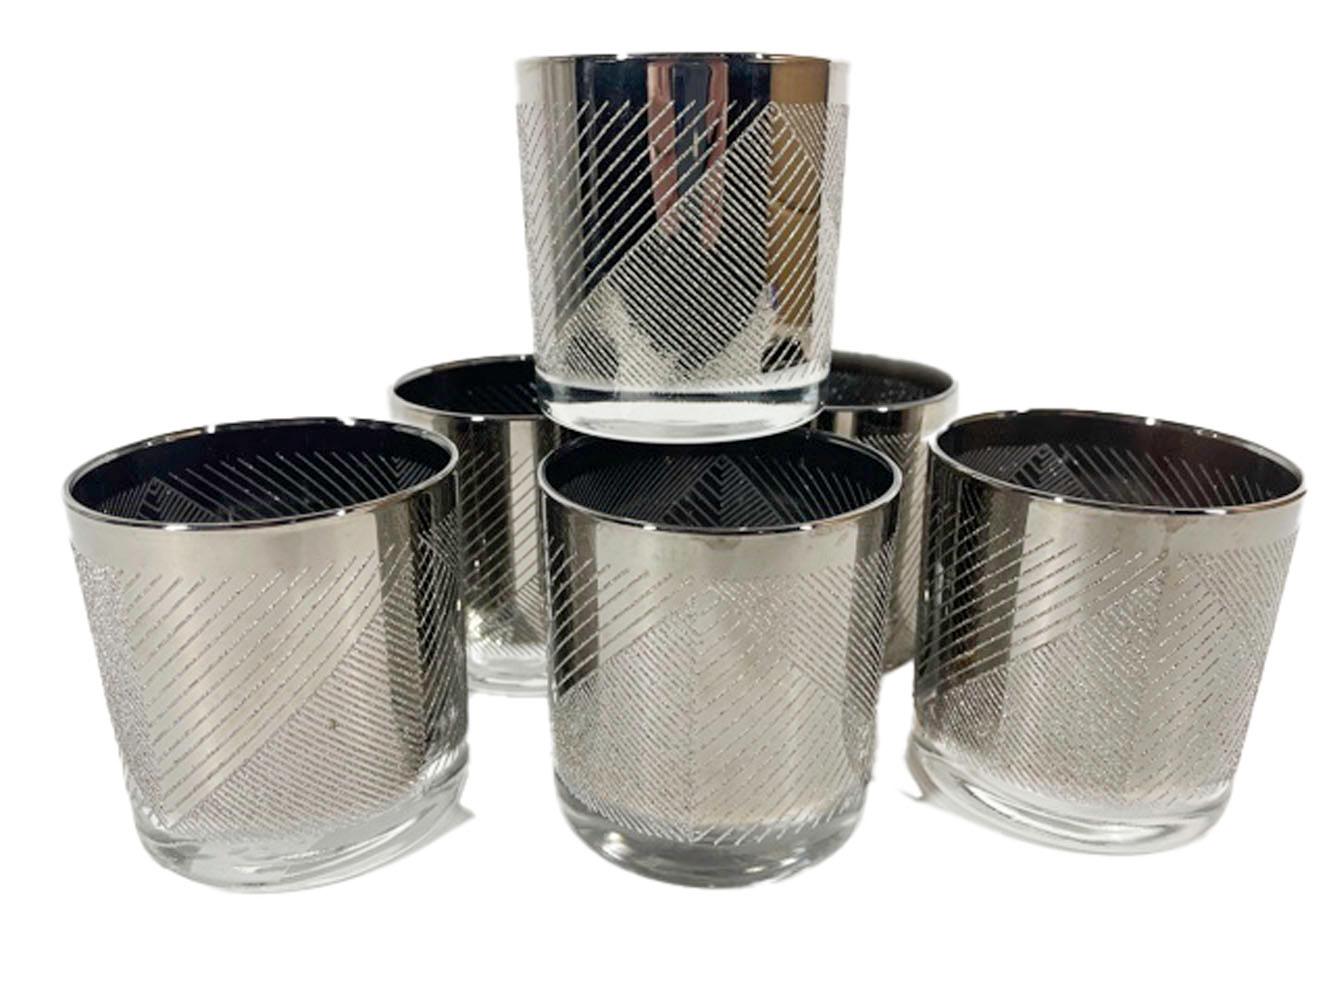 Six silver decorated glasses with a smooth surface above triangular panels of raised textured lines.